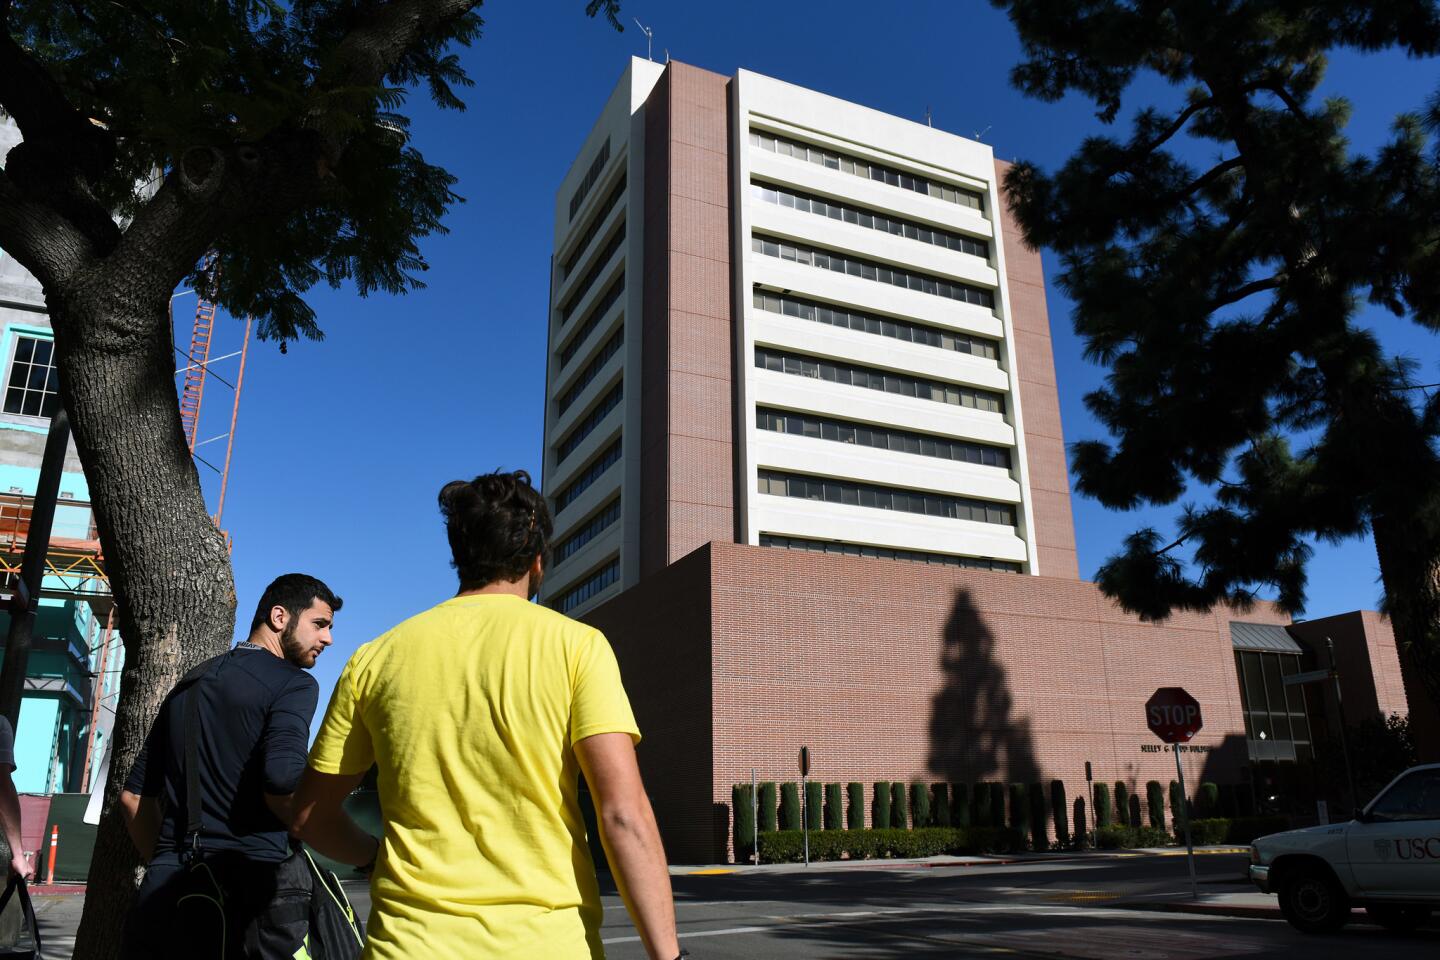 People walk by the Seeley G. Mudd building Saturday on the USC campus where USC psychology professor Bosco Tjan was stabbed to death Friday night.